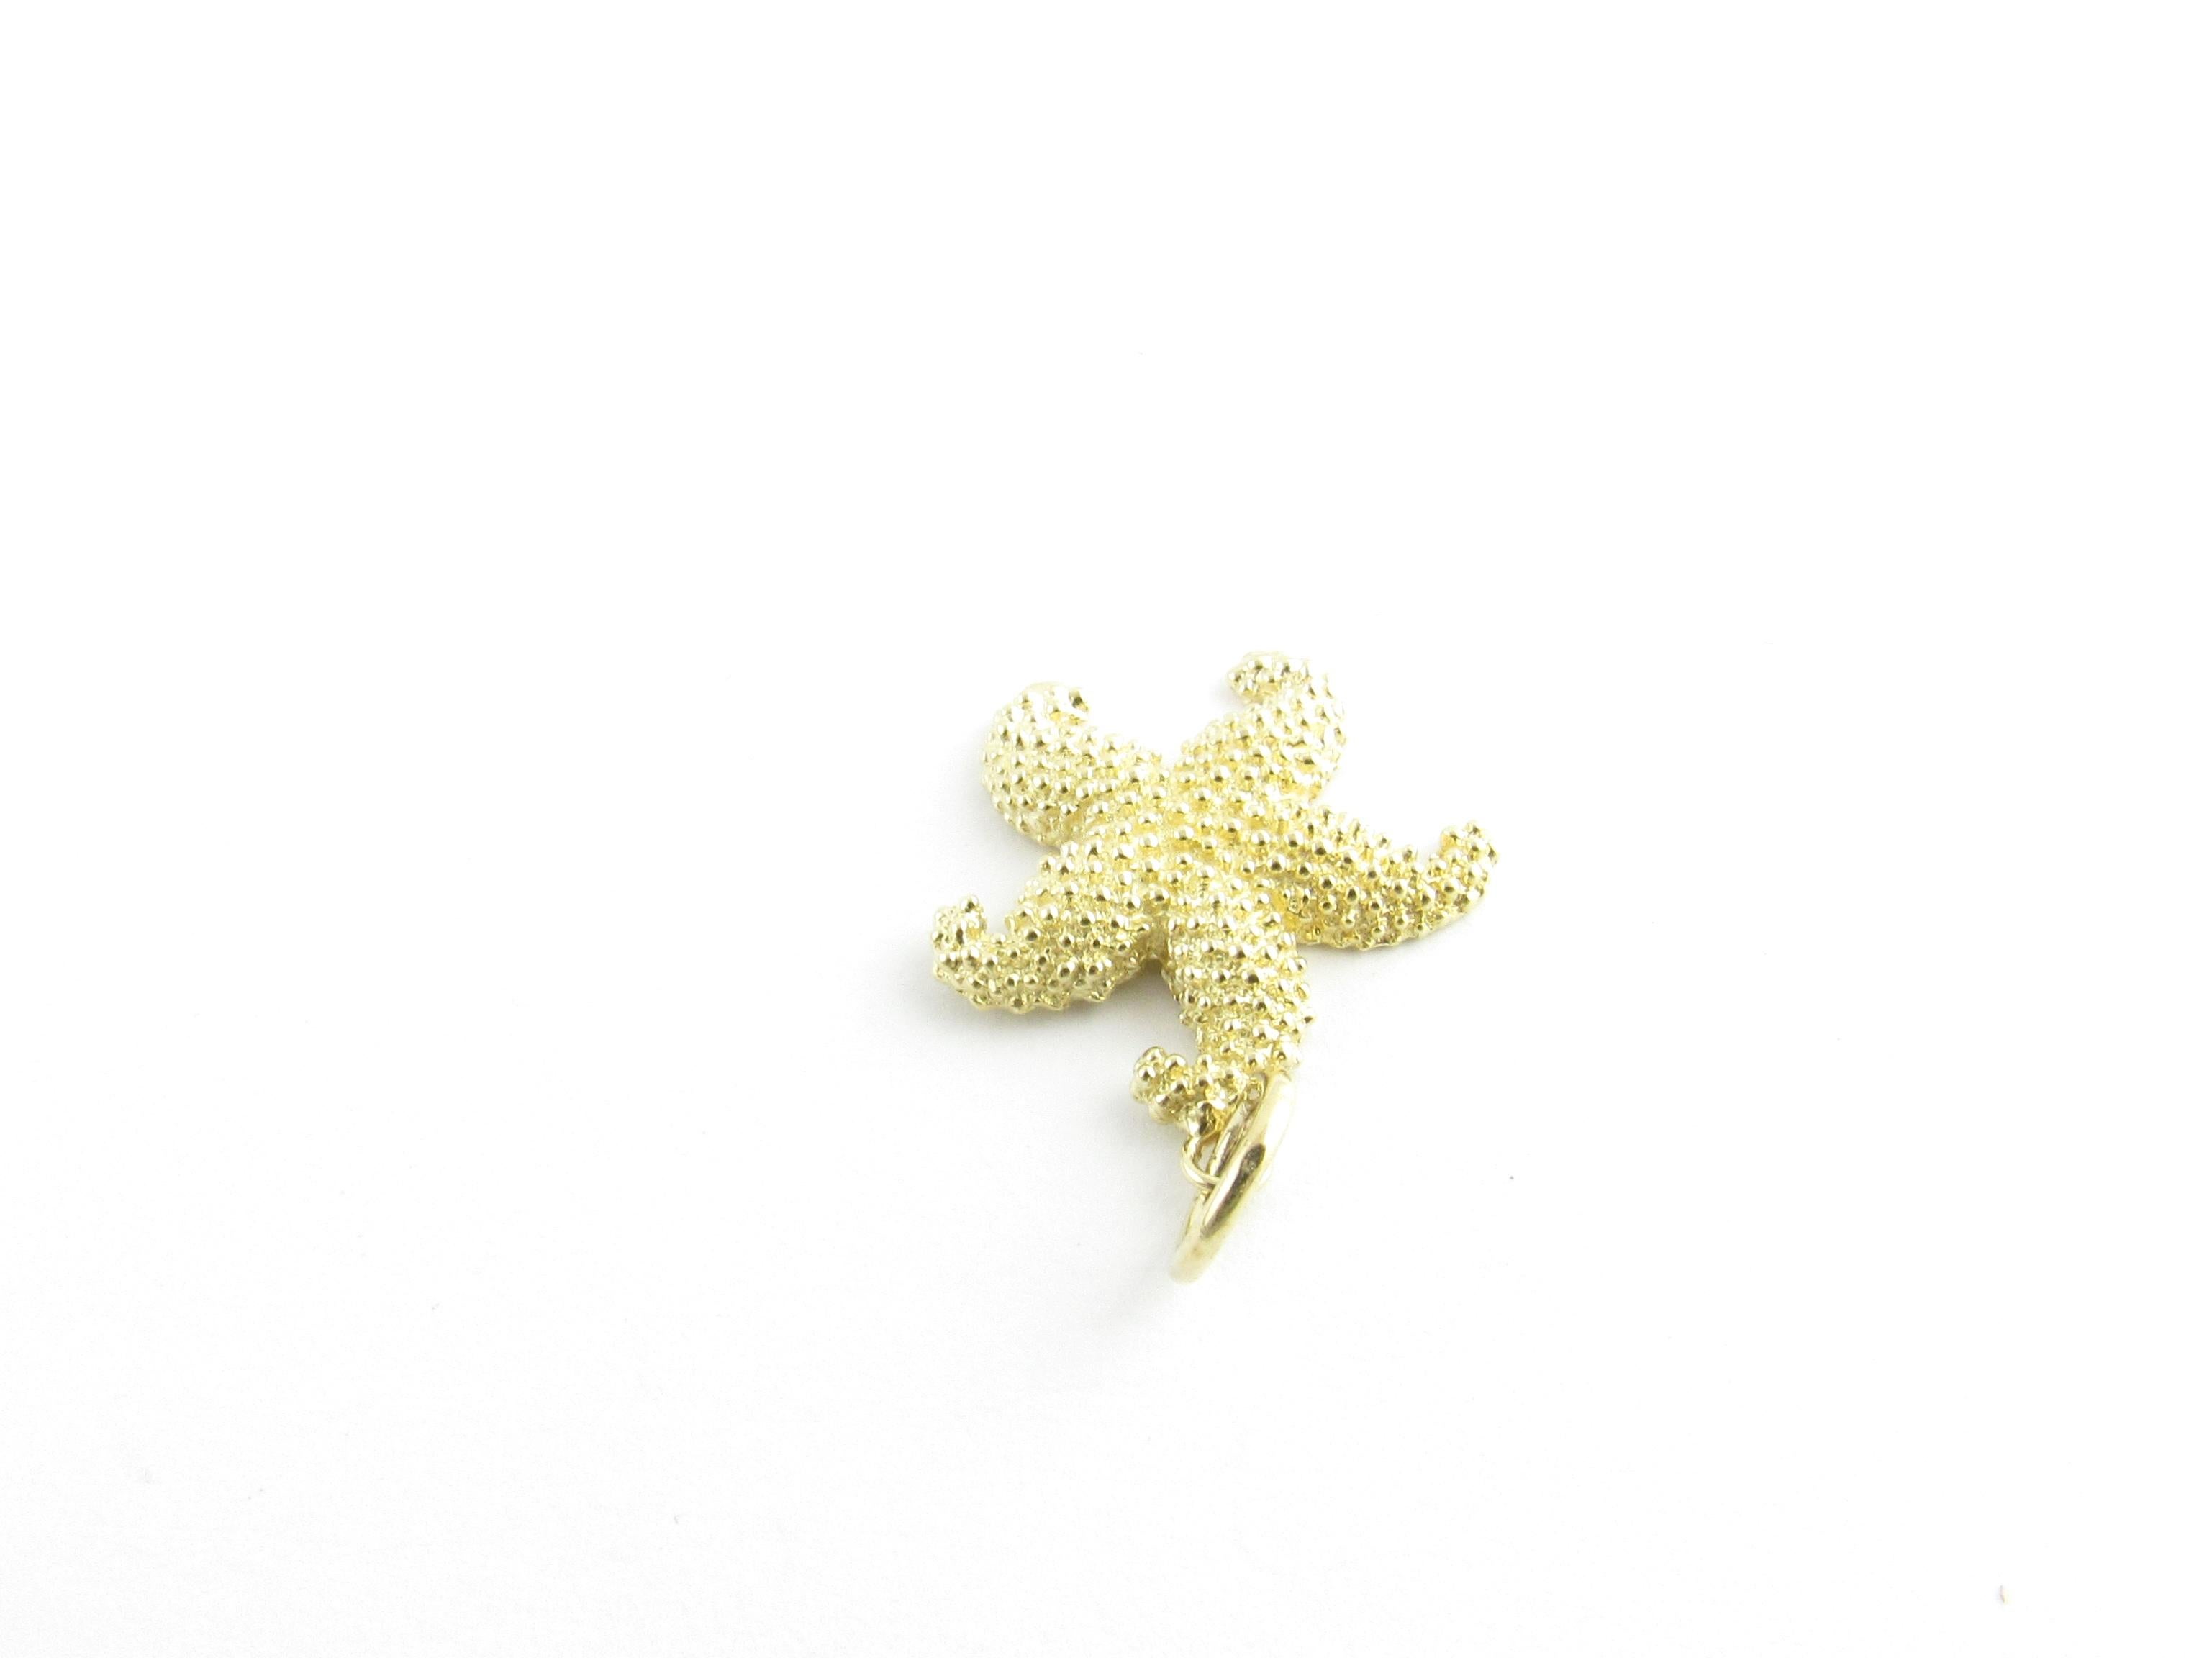 Vintage 14 Karat Yellow Gold Starfish Charm

The star of the sea!

This lovely charm features a beautifully detailed starfish crafted in classic 14K yellow gold.

Size: 21 mm x 18 mm (actual charm)

Weight: 1.2 dwt. / 2.0 gr.

Stamped: 14K

Very